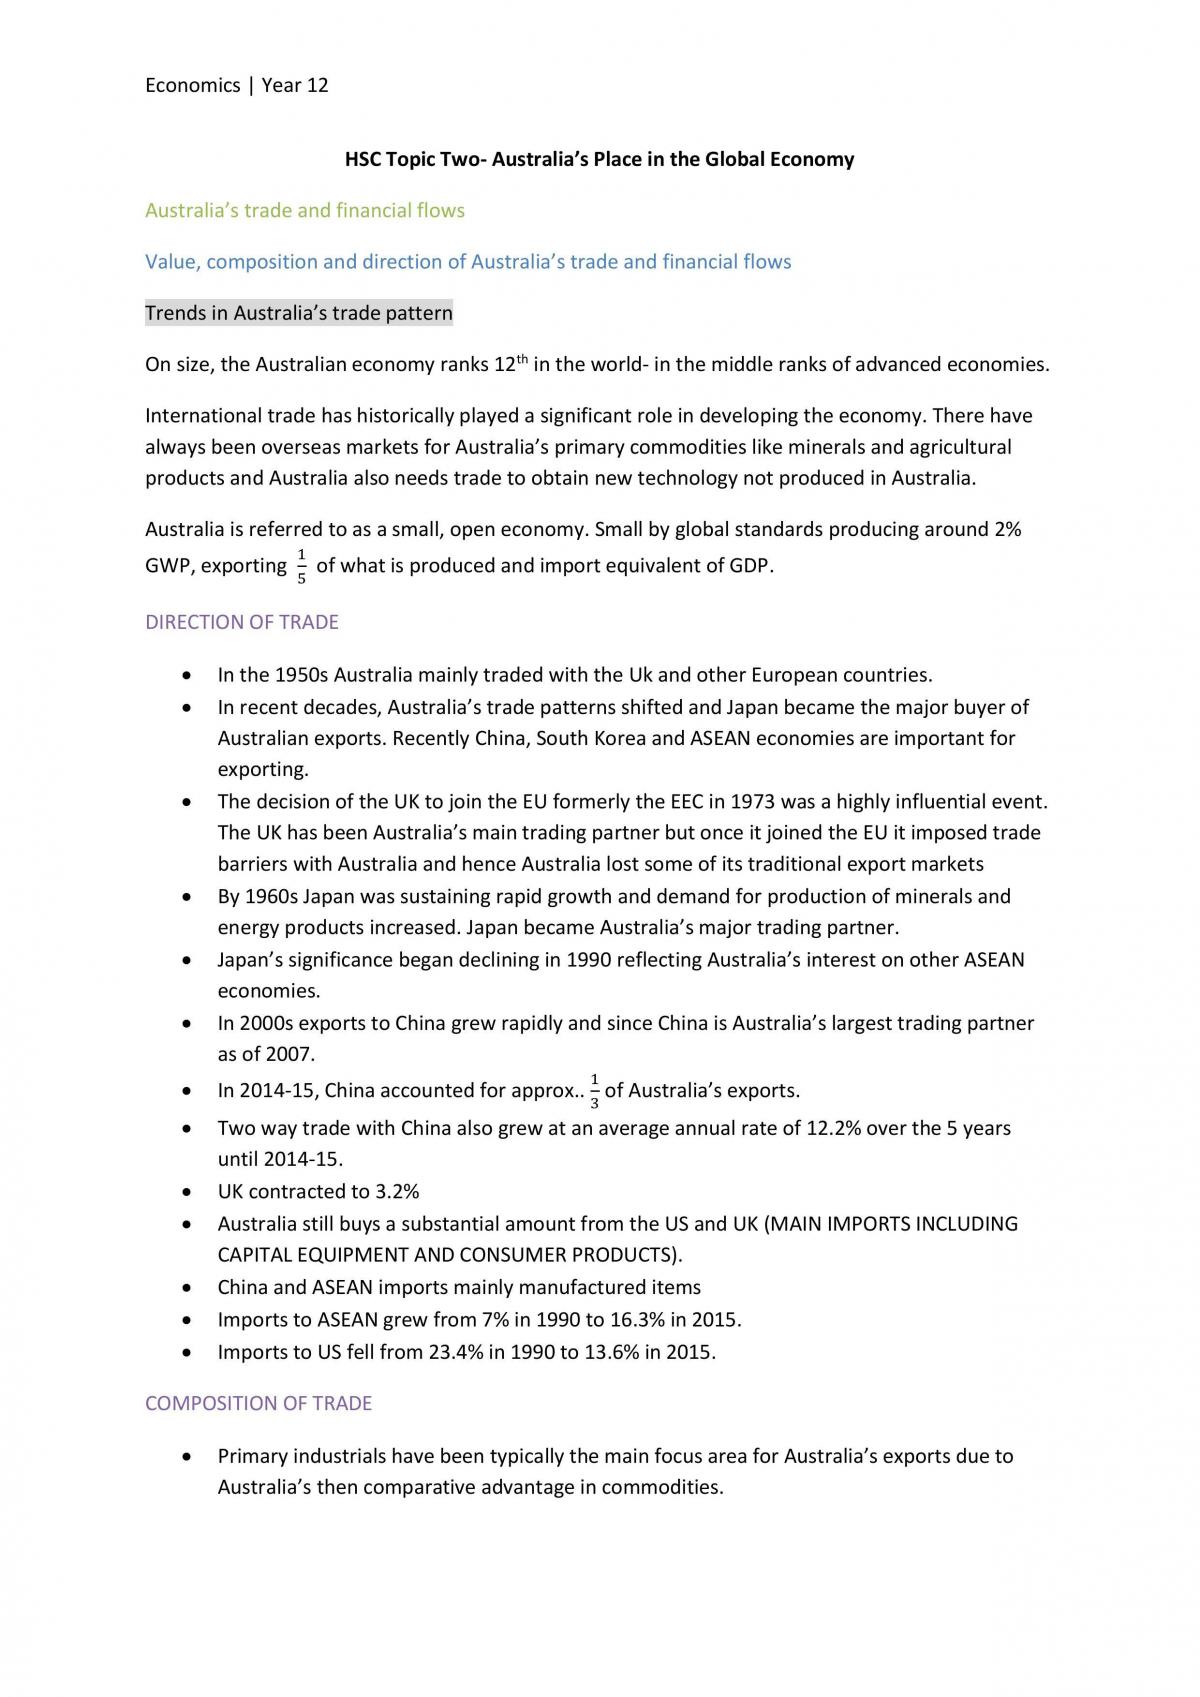 HSC Topic 2 Australia's Place in the Global Economy - Page 1